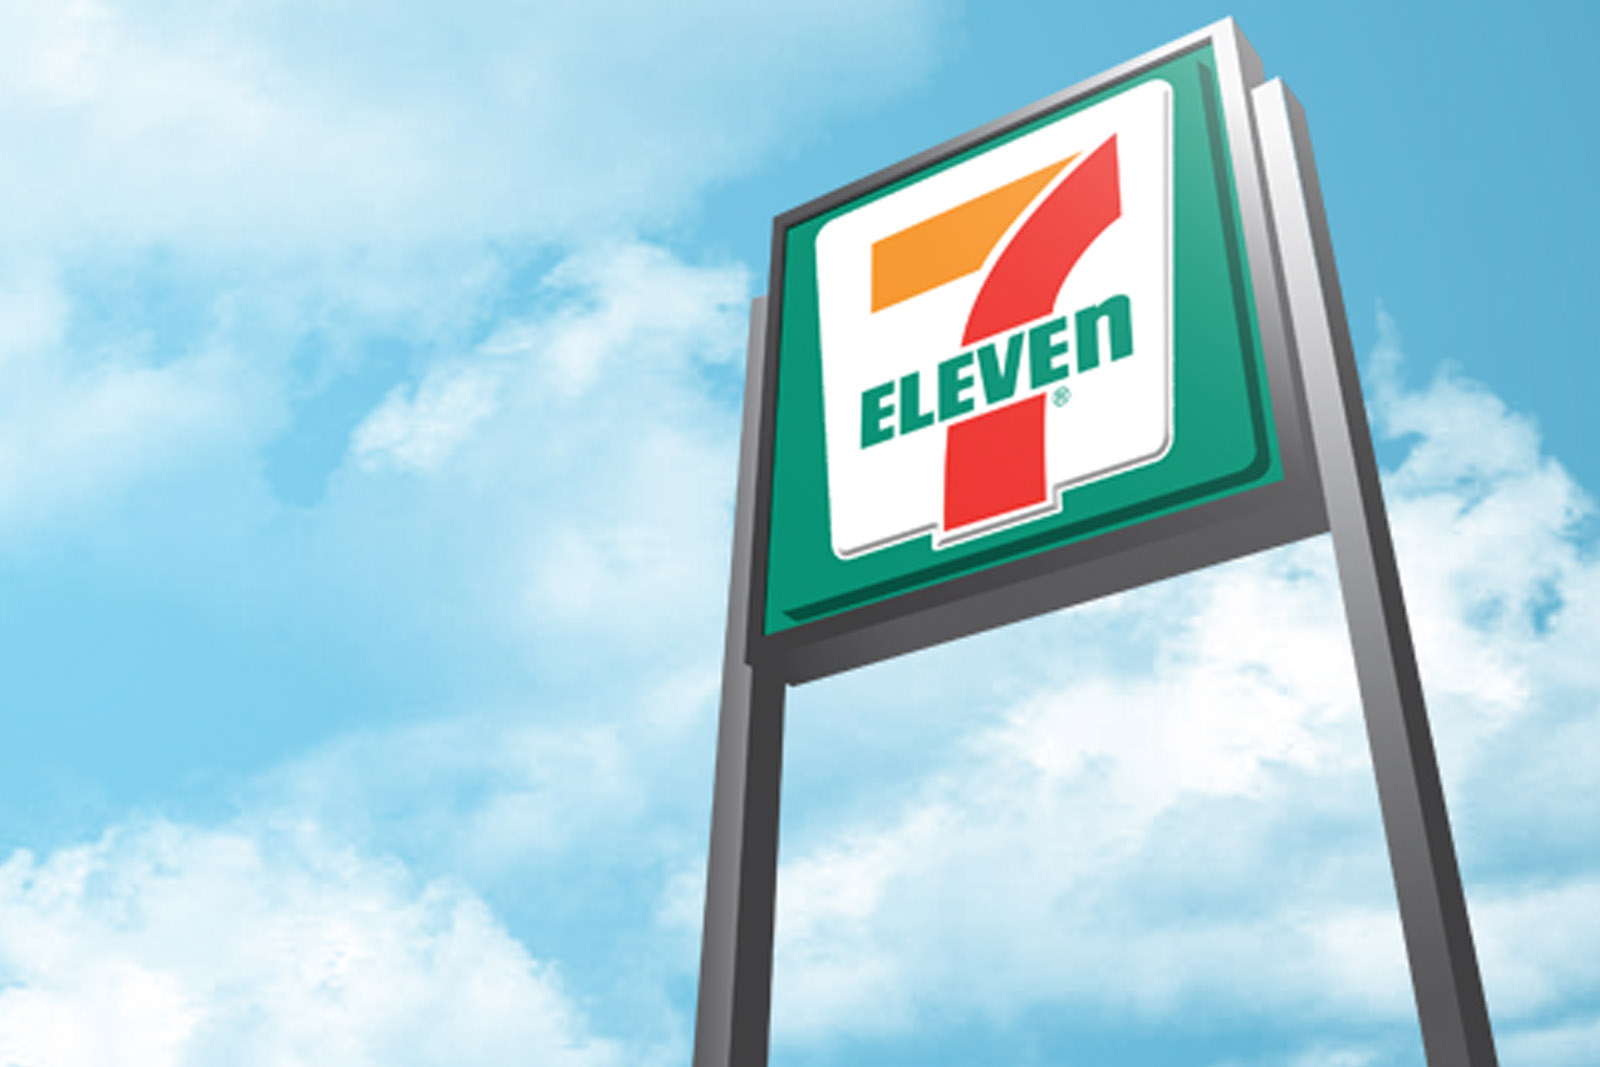 7-11 stores